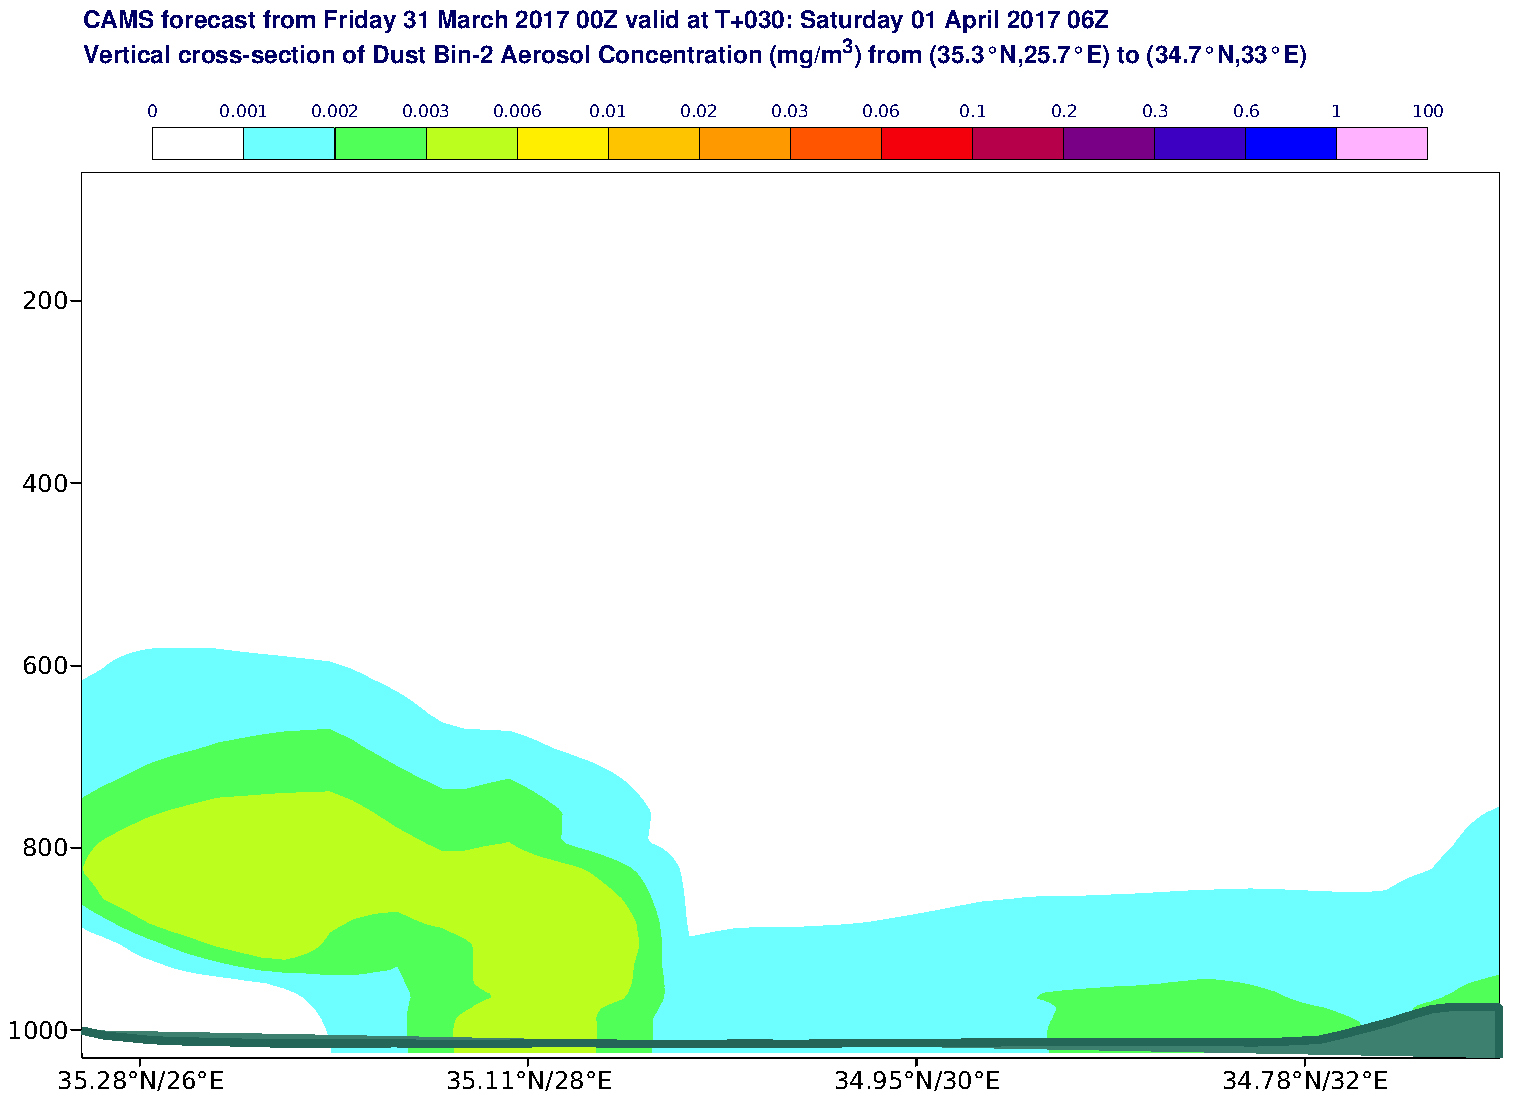 Vertical cross-section of Dust Bin-2 Aerosol Concentration (mg/m3) valid at T30 - 2017-04-01 06:00